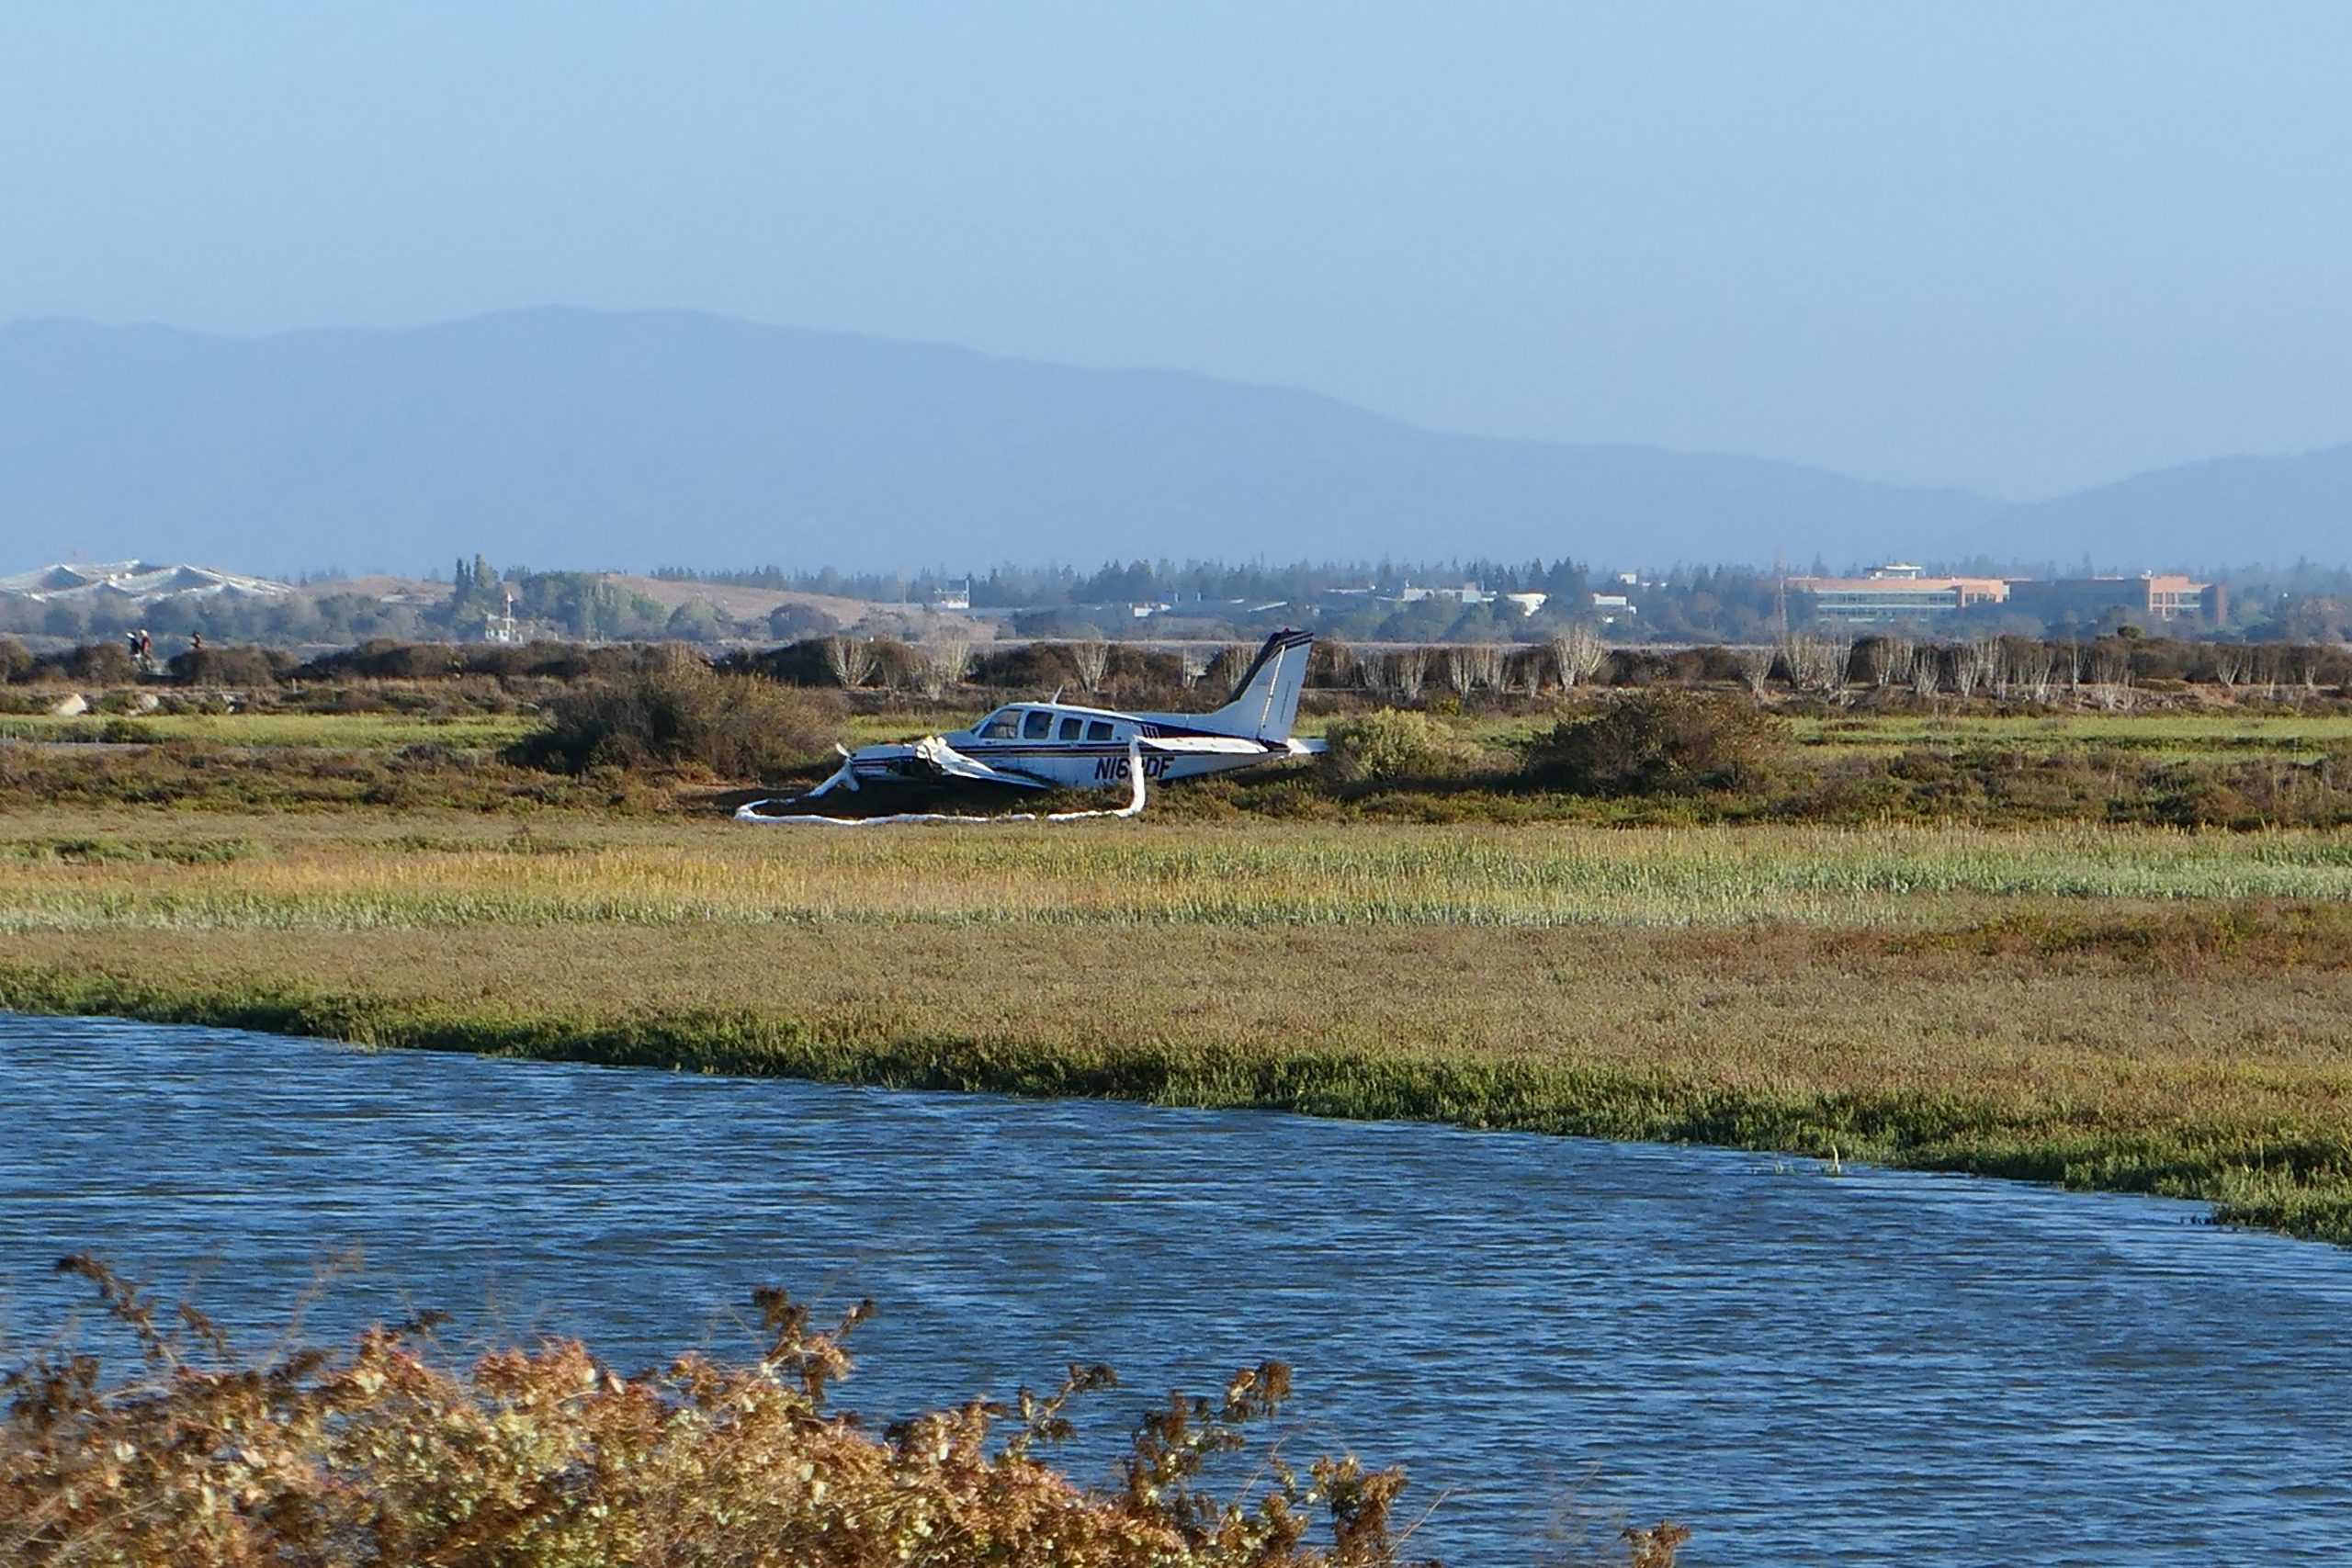 Twin-engine Beechcraft Baron 58P rests in the marshes of the Baylands after crashing there Monday afternoon. Photo by Cayden Gu